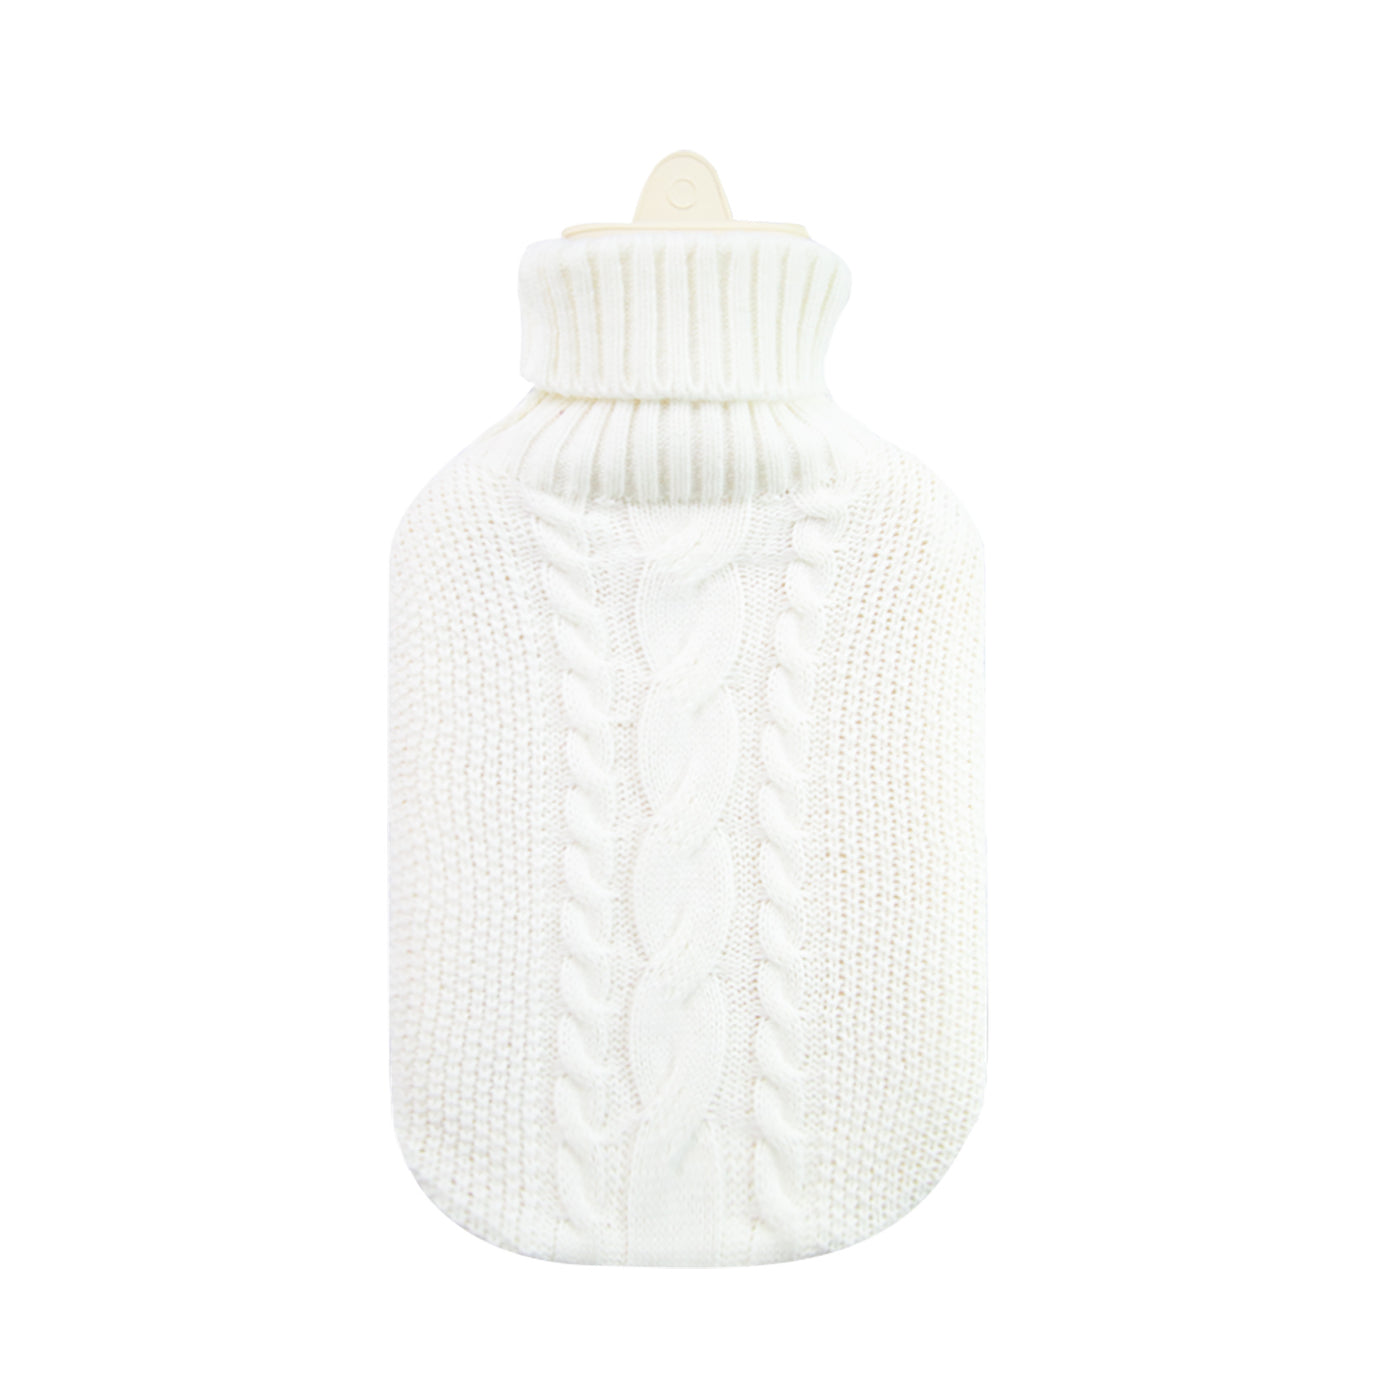 Hot Water Bottle & Cover - Cream Cable Knit - The Grain Shop Online Store